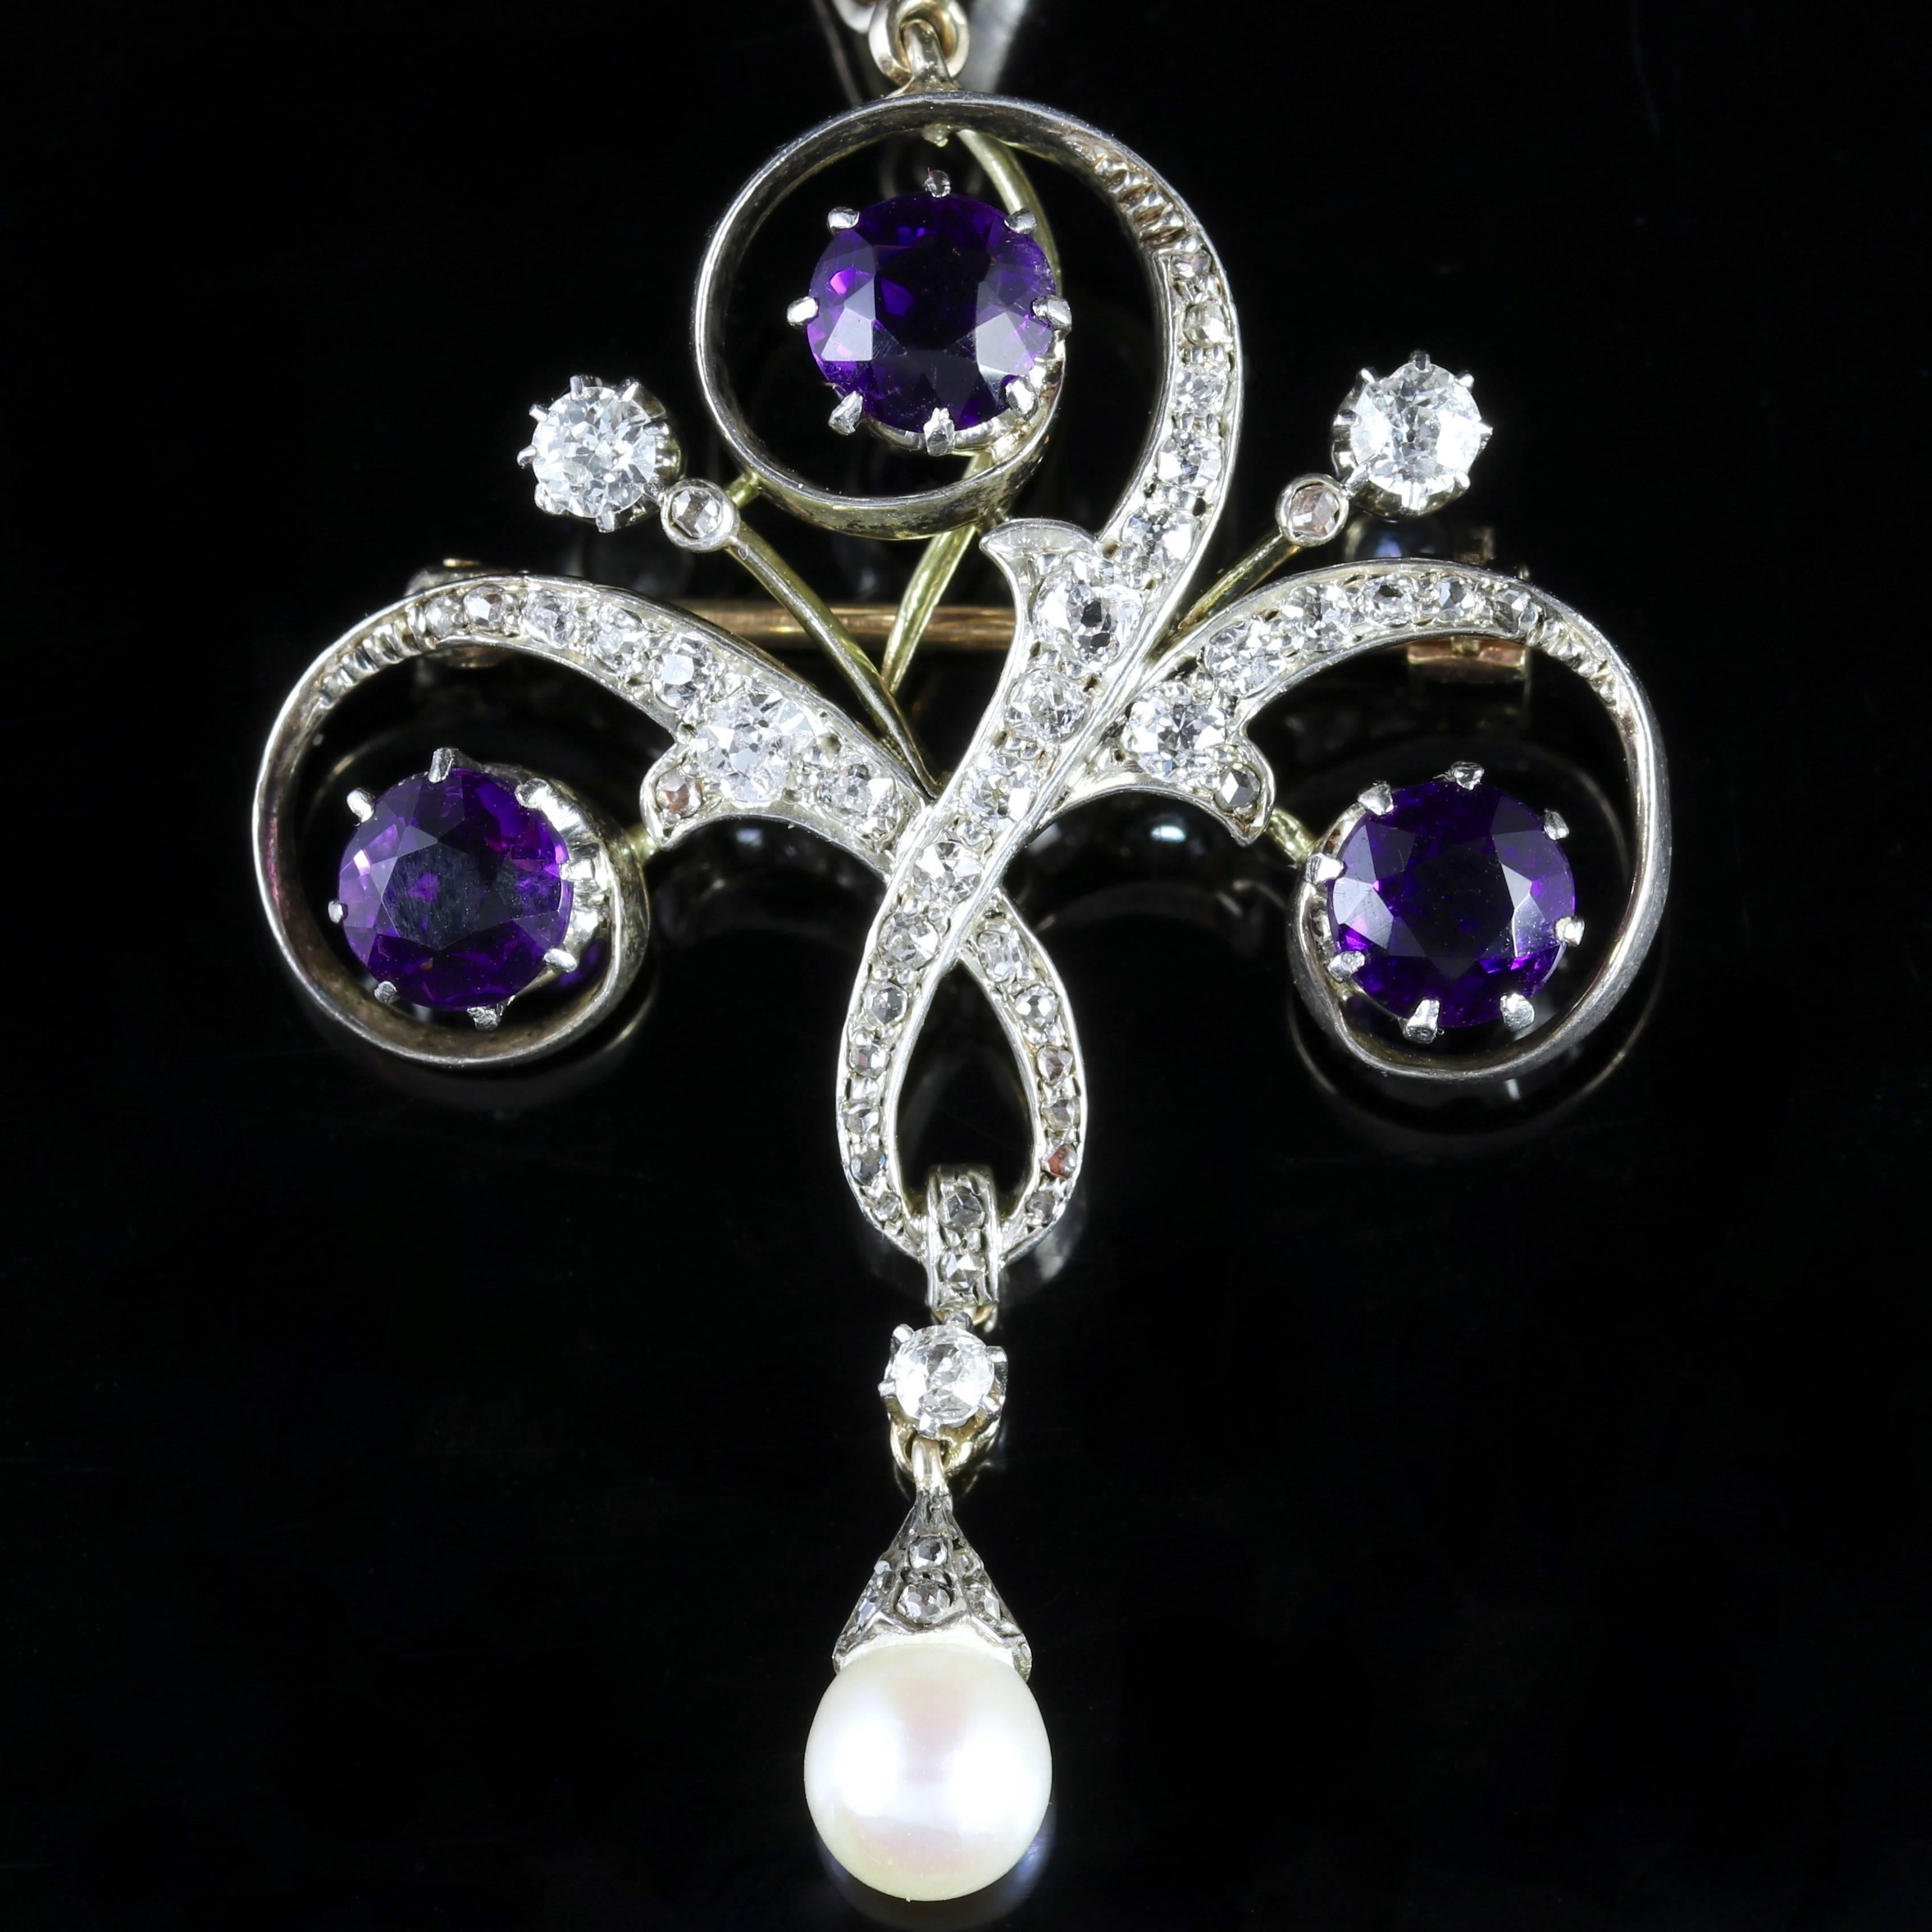 To read more please click continue reading below-

This is a fabulous all Platinum necklace leading to a stunning 18ct Yellow Gold Diamond and Amethyst pendant brooch.

A trilogy of 0.75ct Amethysts are set into this fabulous pendant and adorned